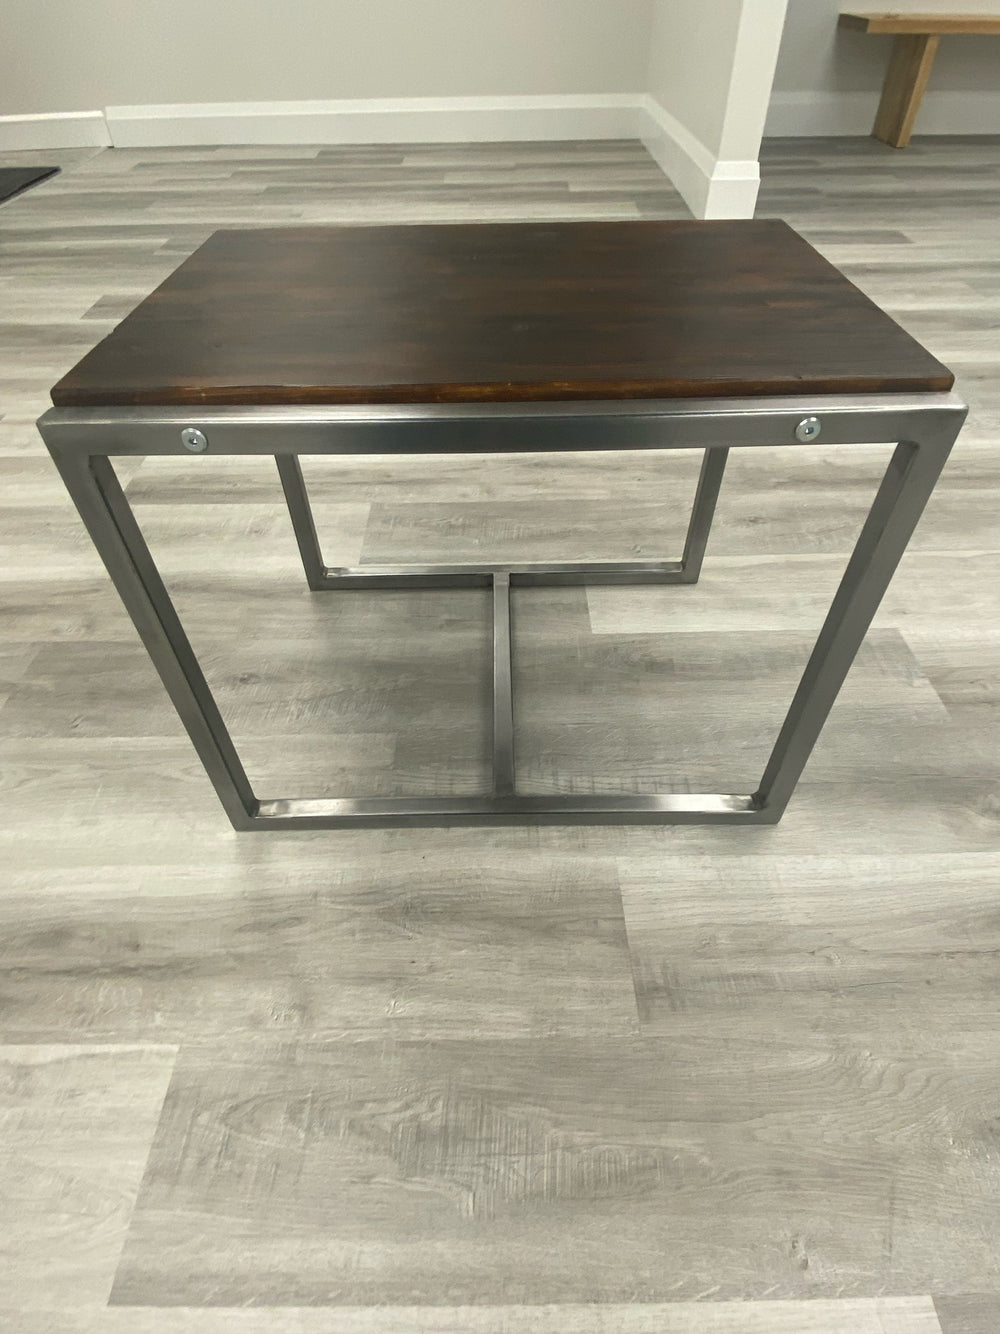 Walnut side table with steel square legs